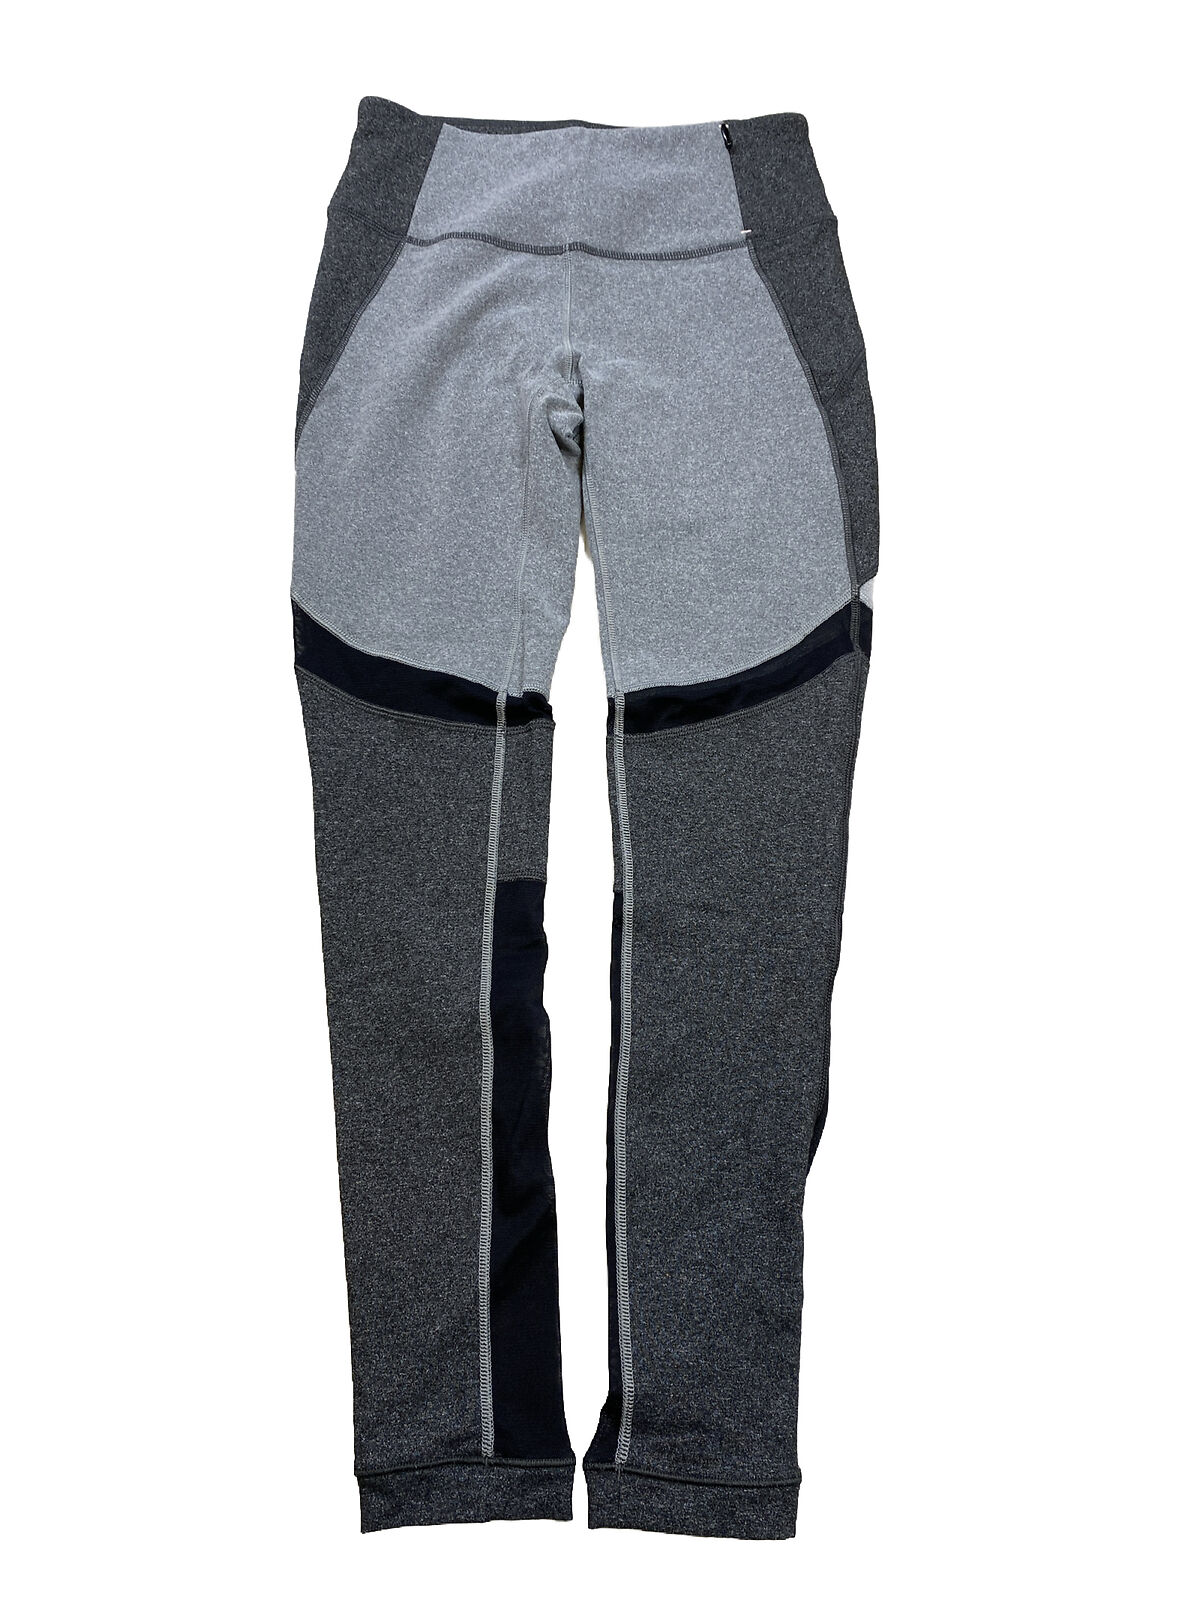 Calia Women's Gray 7/8 Essential Athletic Leggings - XS – The Resell Club